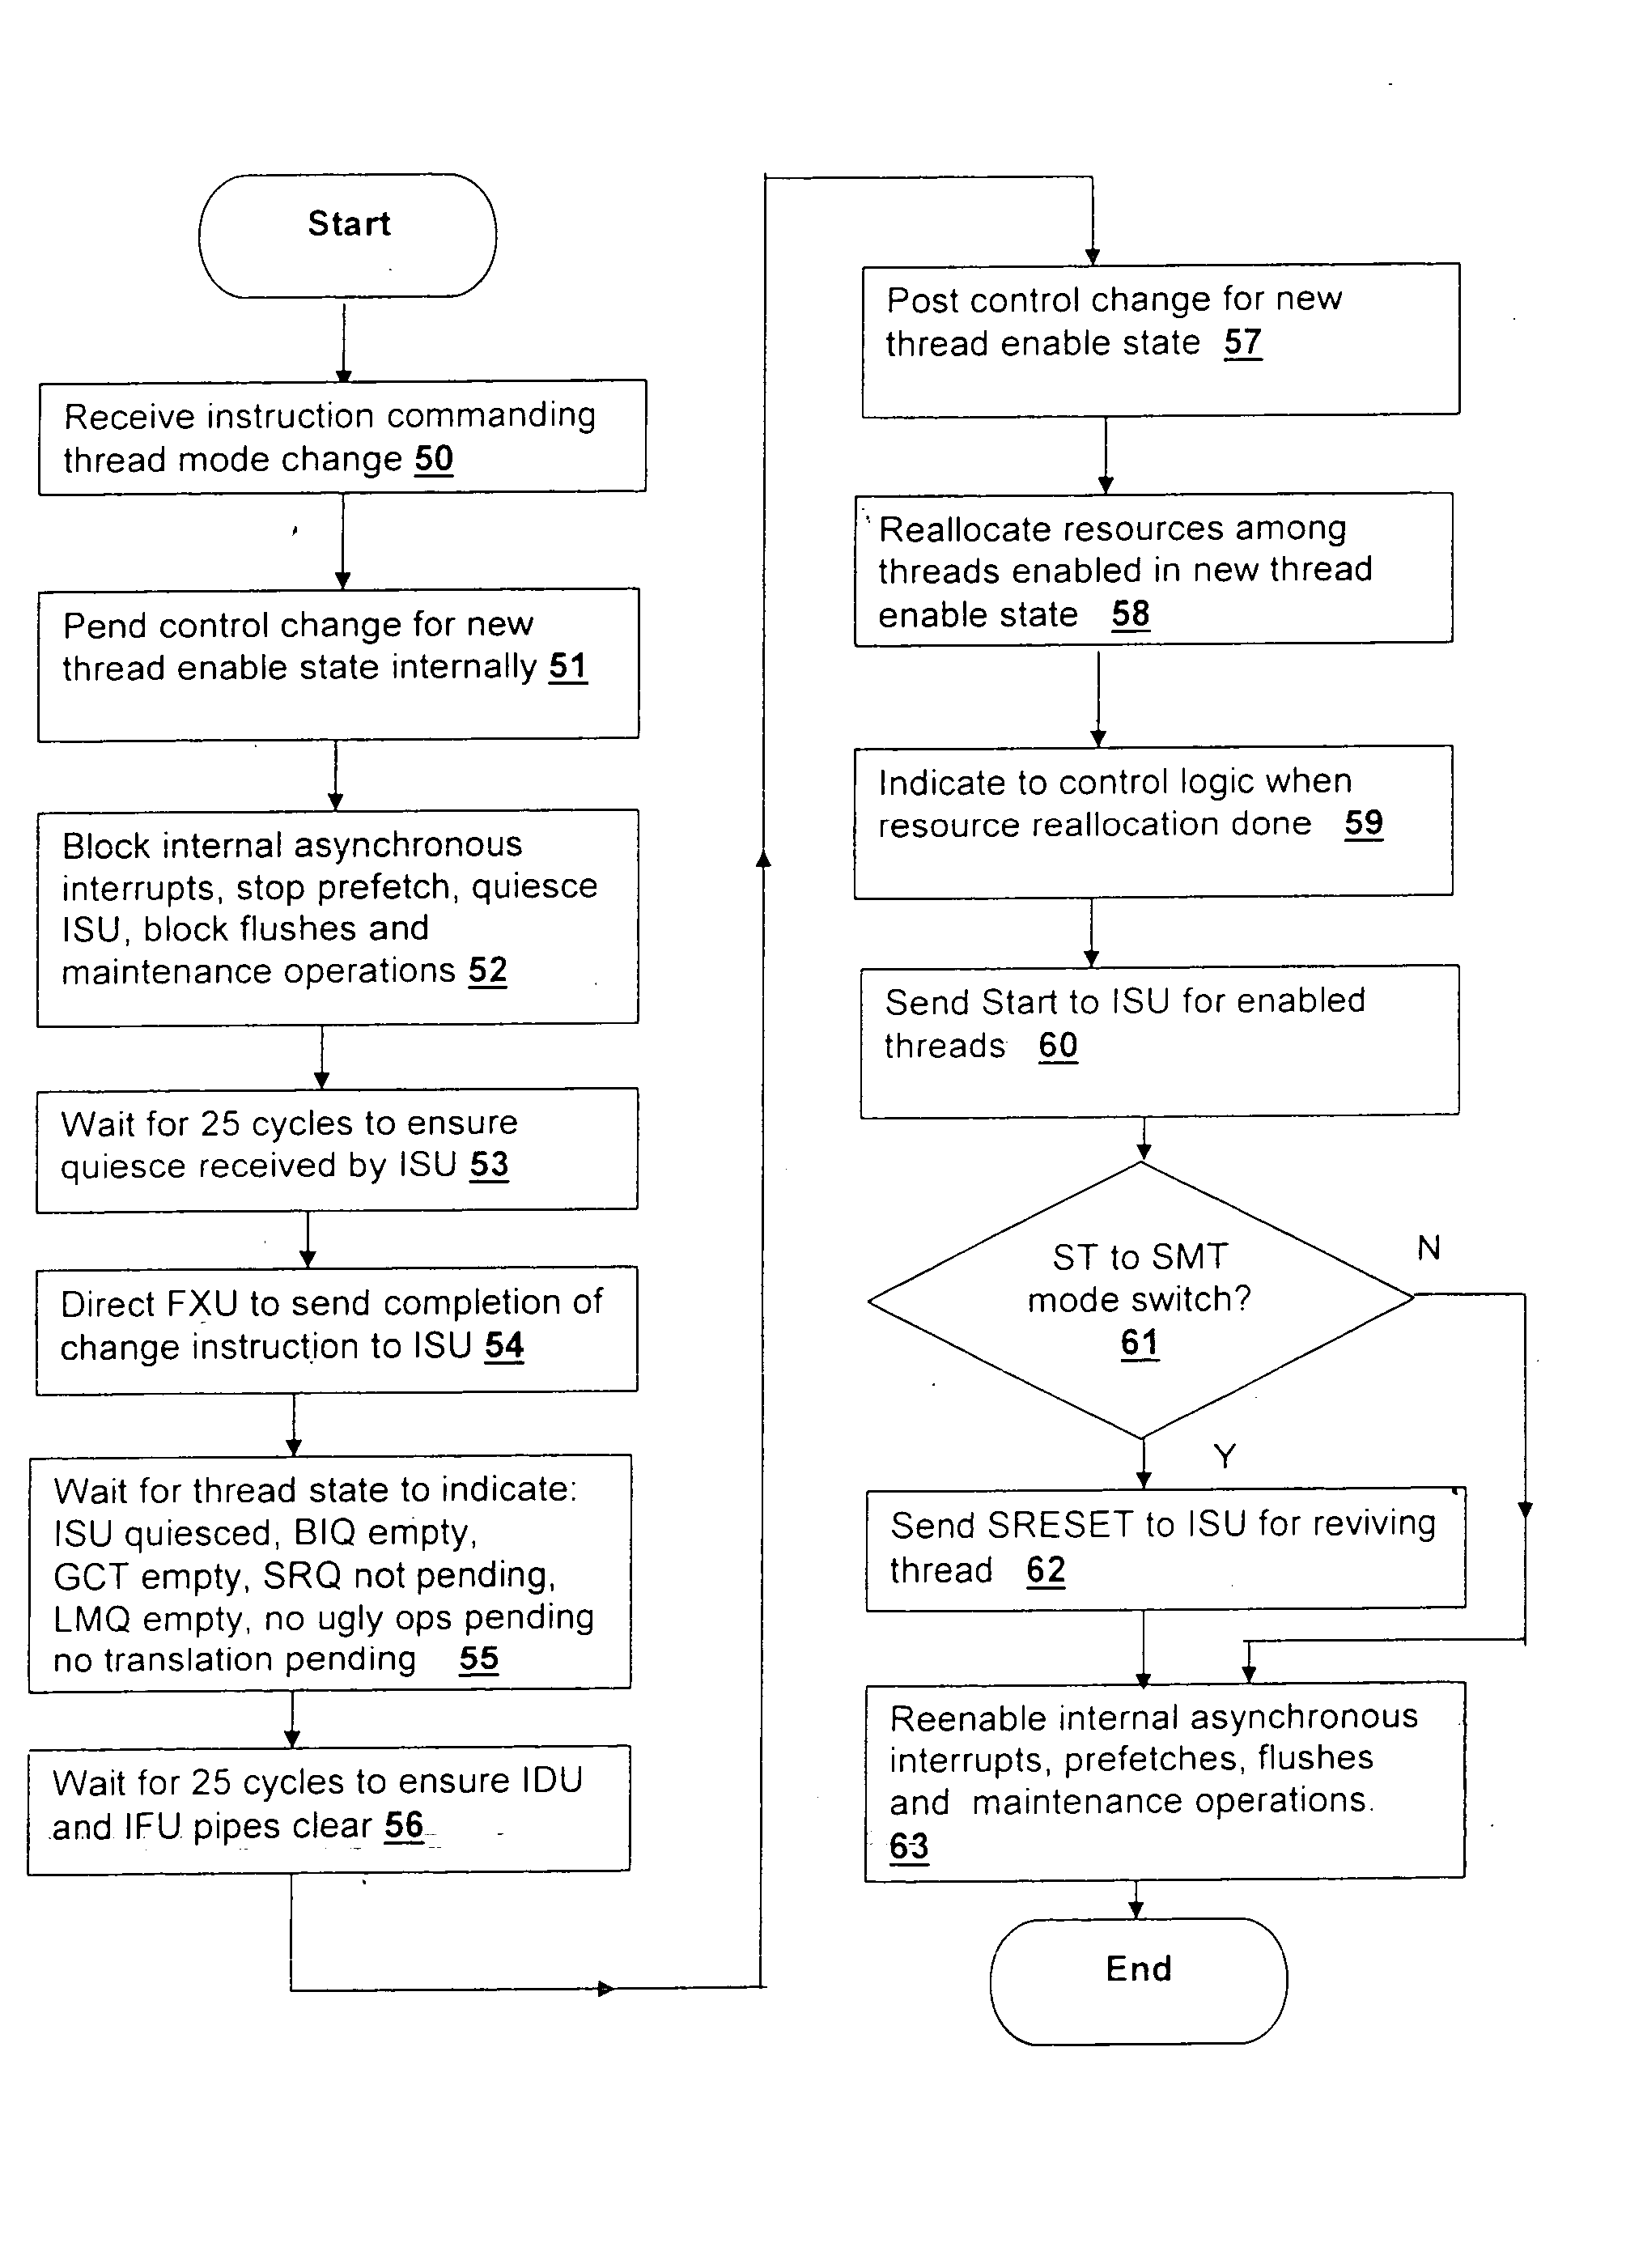 Method and logical apparatus for managing resource redistribution in a simultaneous multi-threaded (SMT) processor